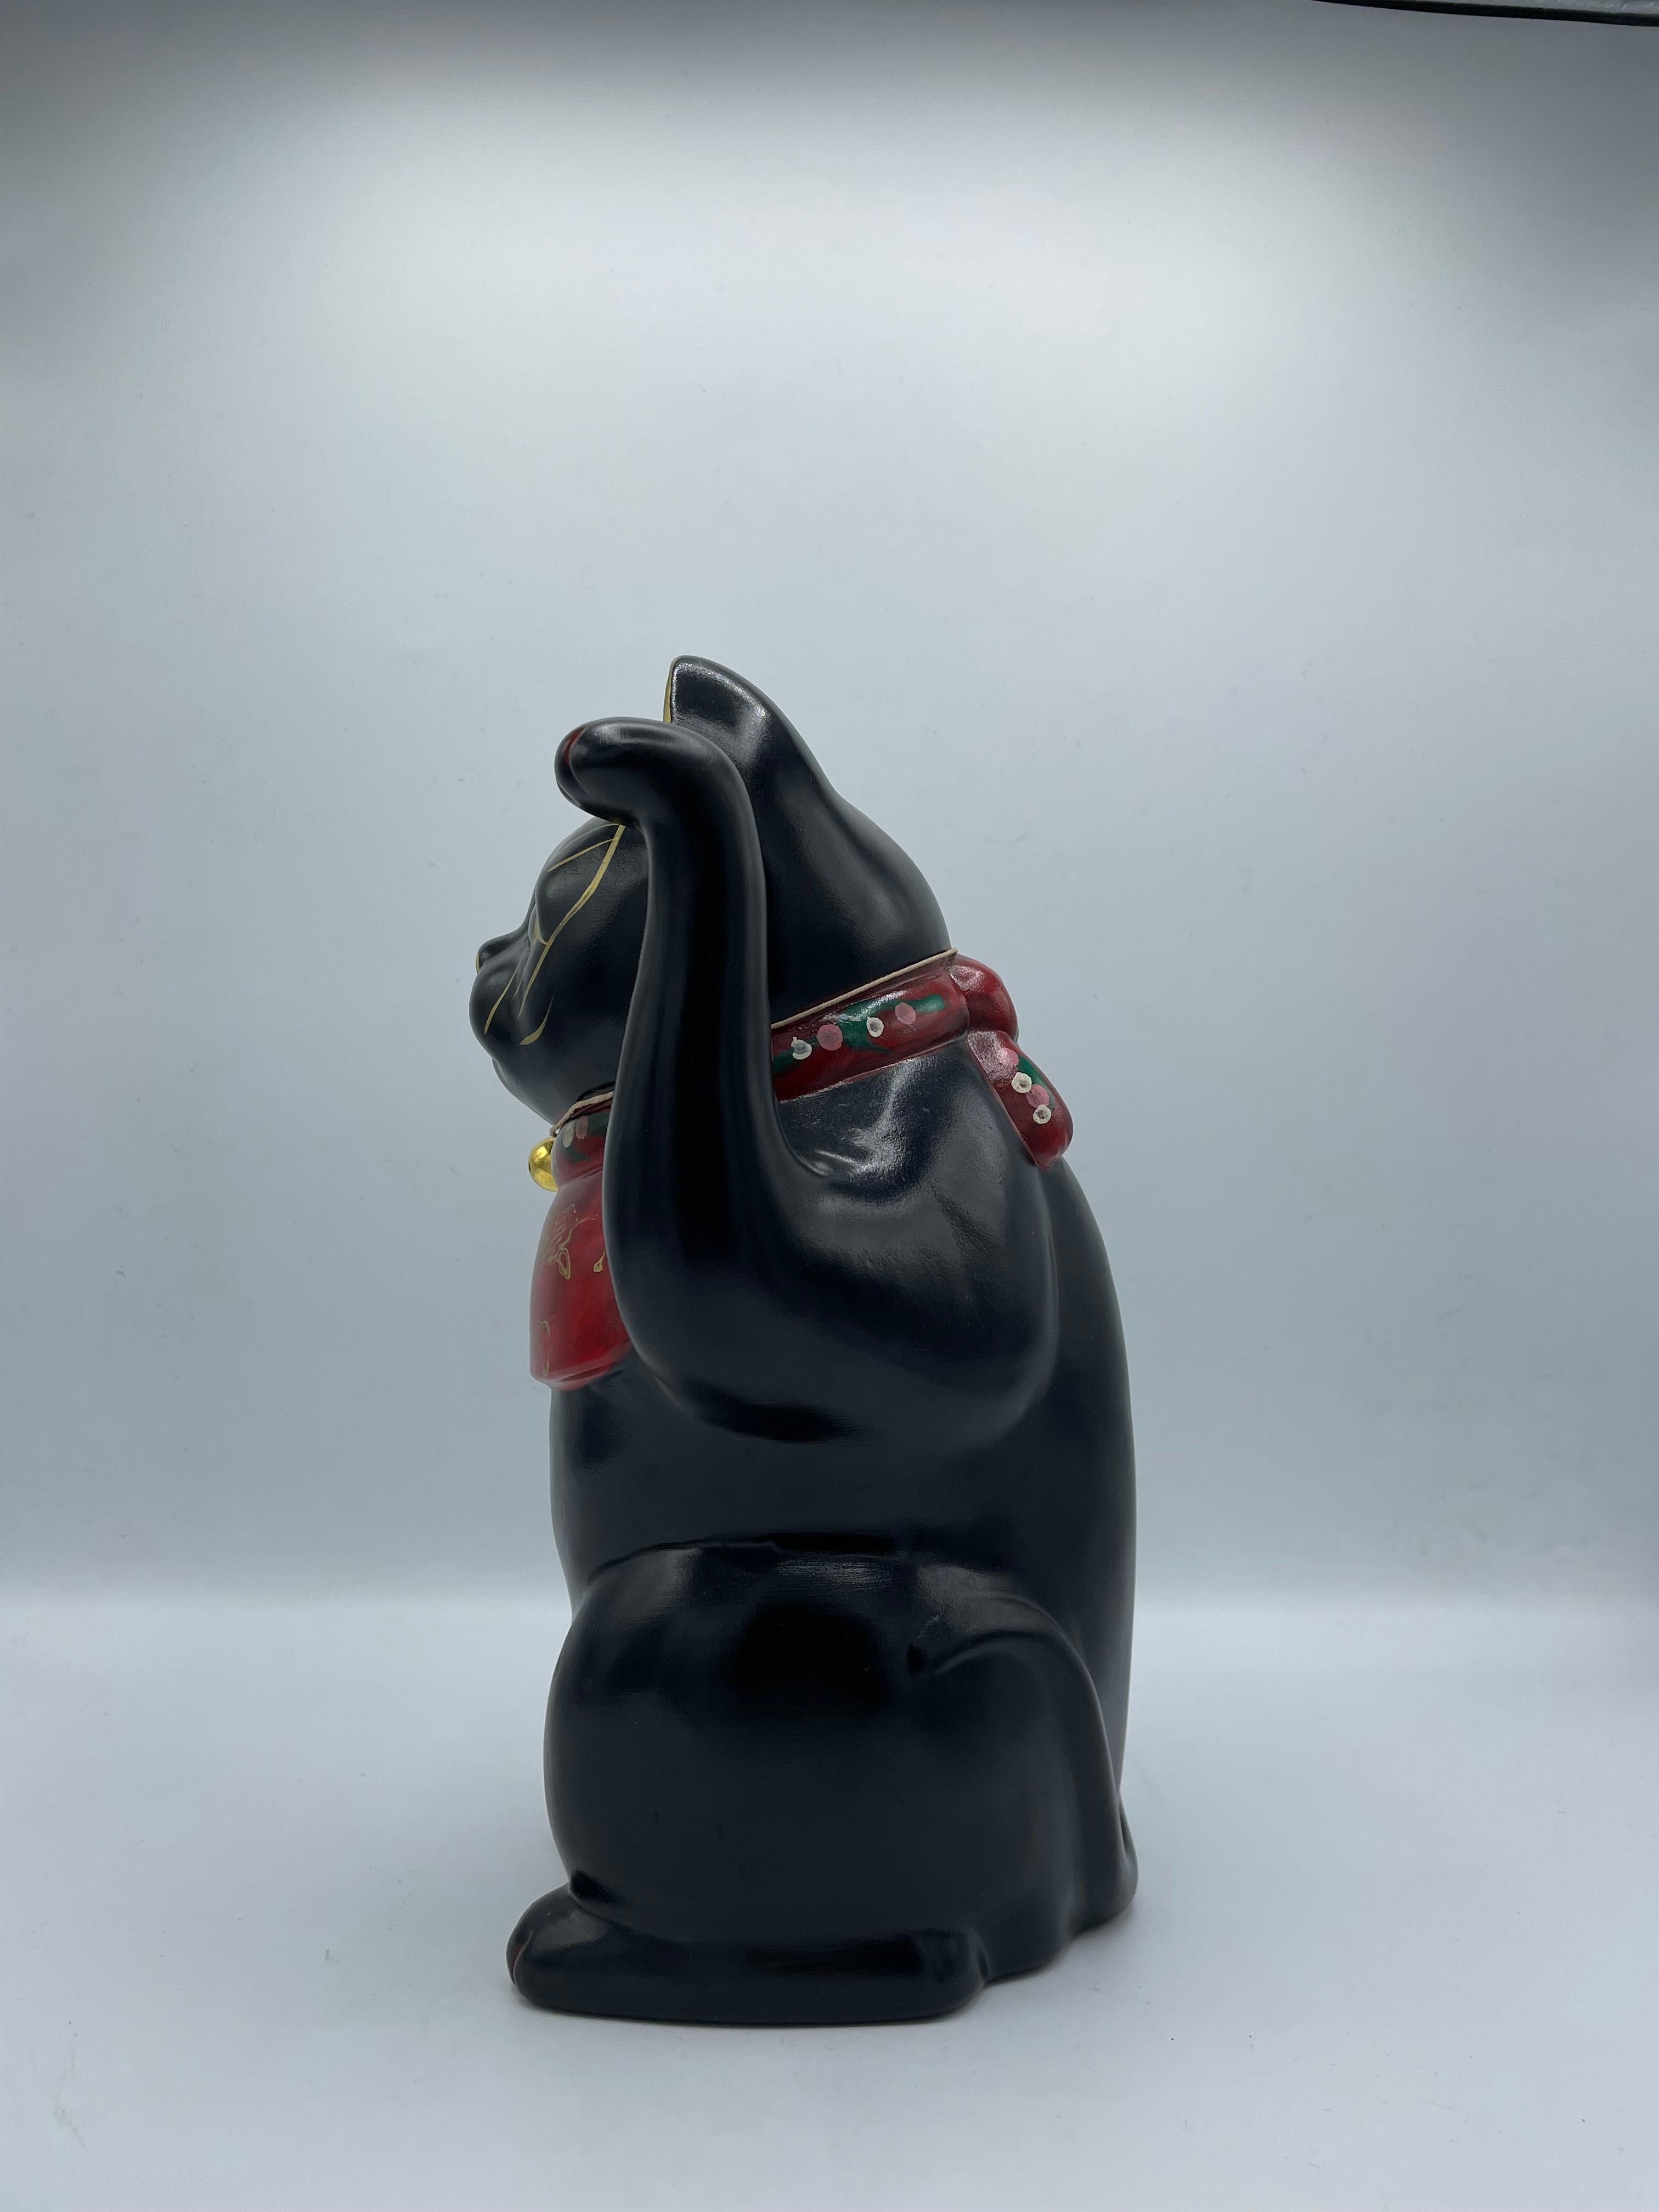 This is an antique maneki neko cat object. It is painted in black and around the neck, it is in red.
This object was made in Japan around 1960s in showa era.

Dimensions: 13.5 x 13 x H26 cm

The maneki-neko is a common Japanese figurine which